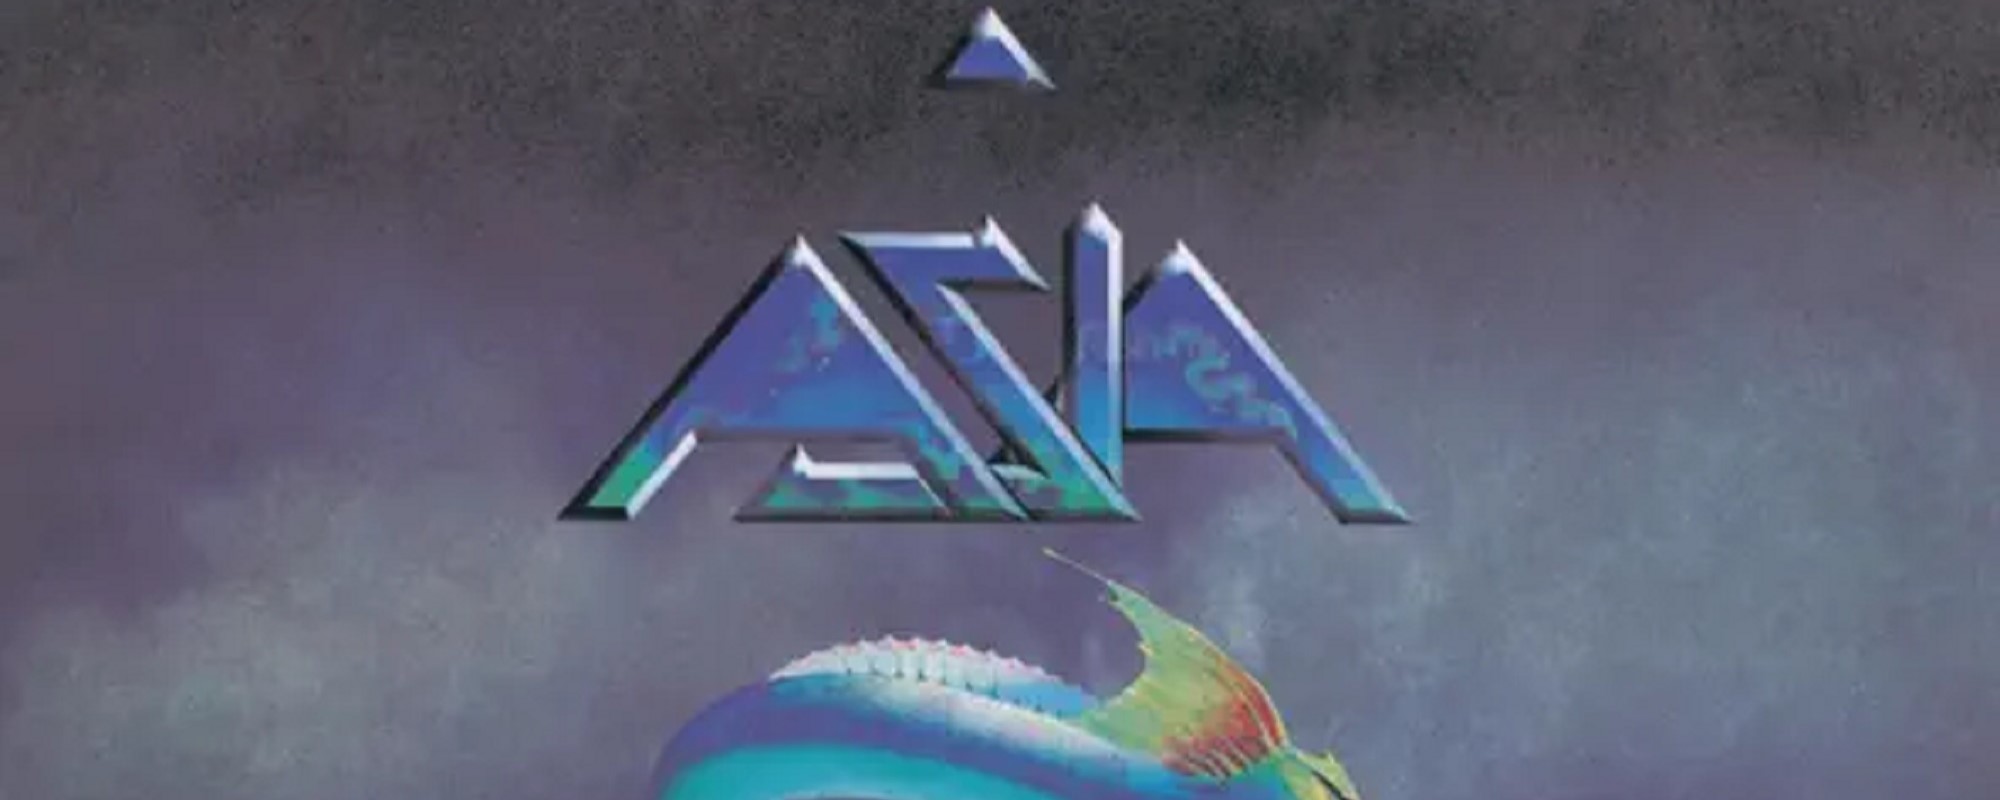 Remember When: Asia Topped the ‘Billboard’ 200 with Their Self-Titled Debut, Which Became 1982’s Best-Selling Album